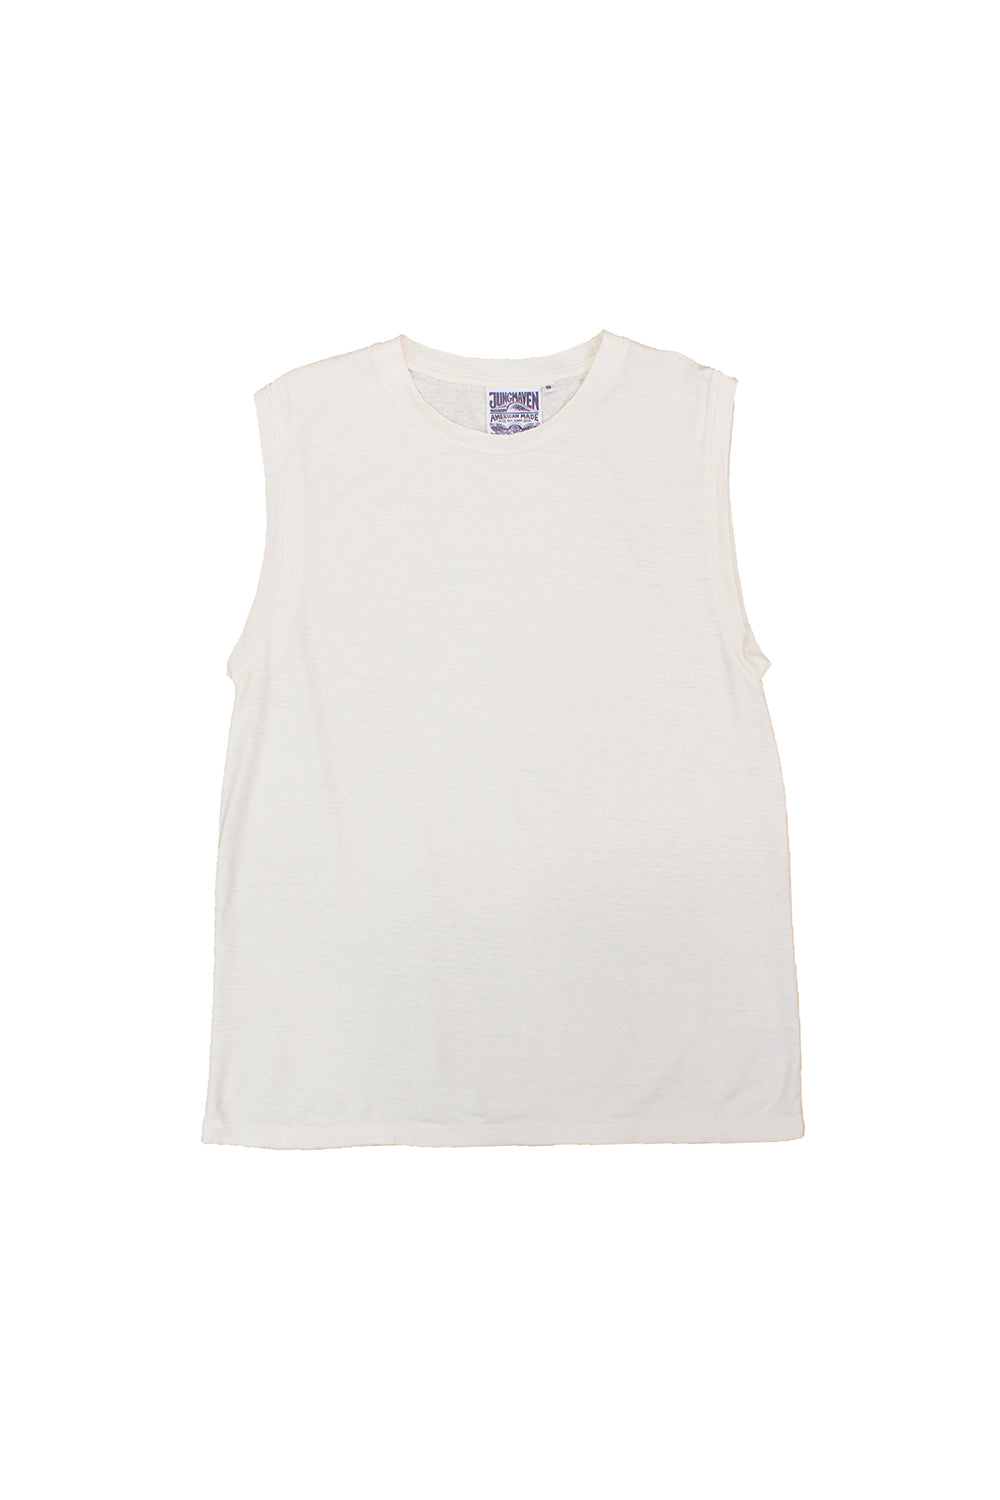 Malibu Muscle Tee | Jungmaven Hemp Clothing & Accessories / Color: Washed White